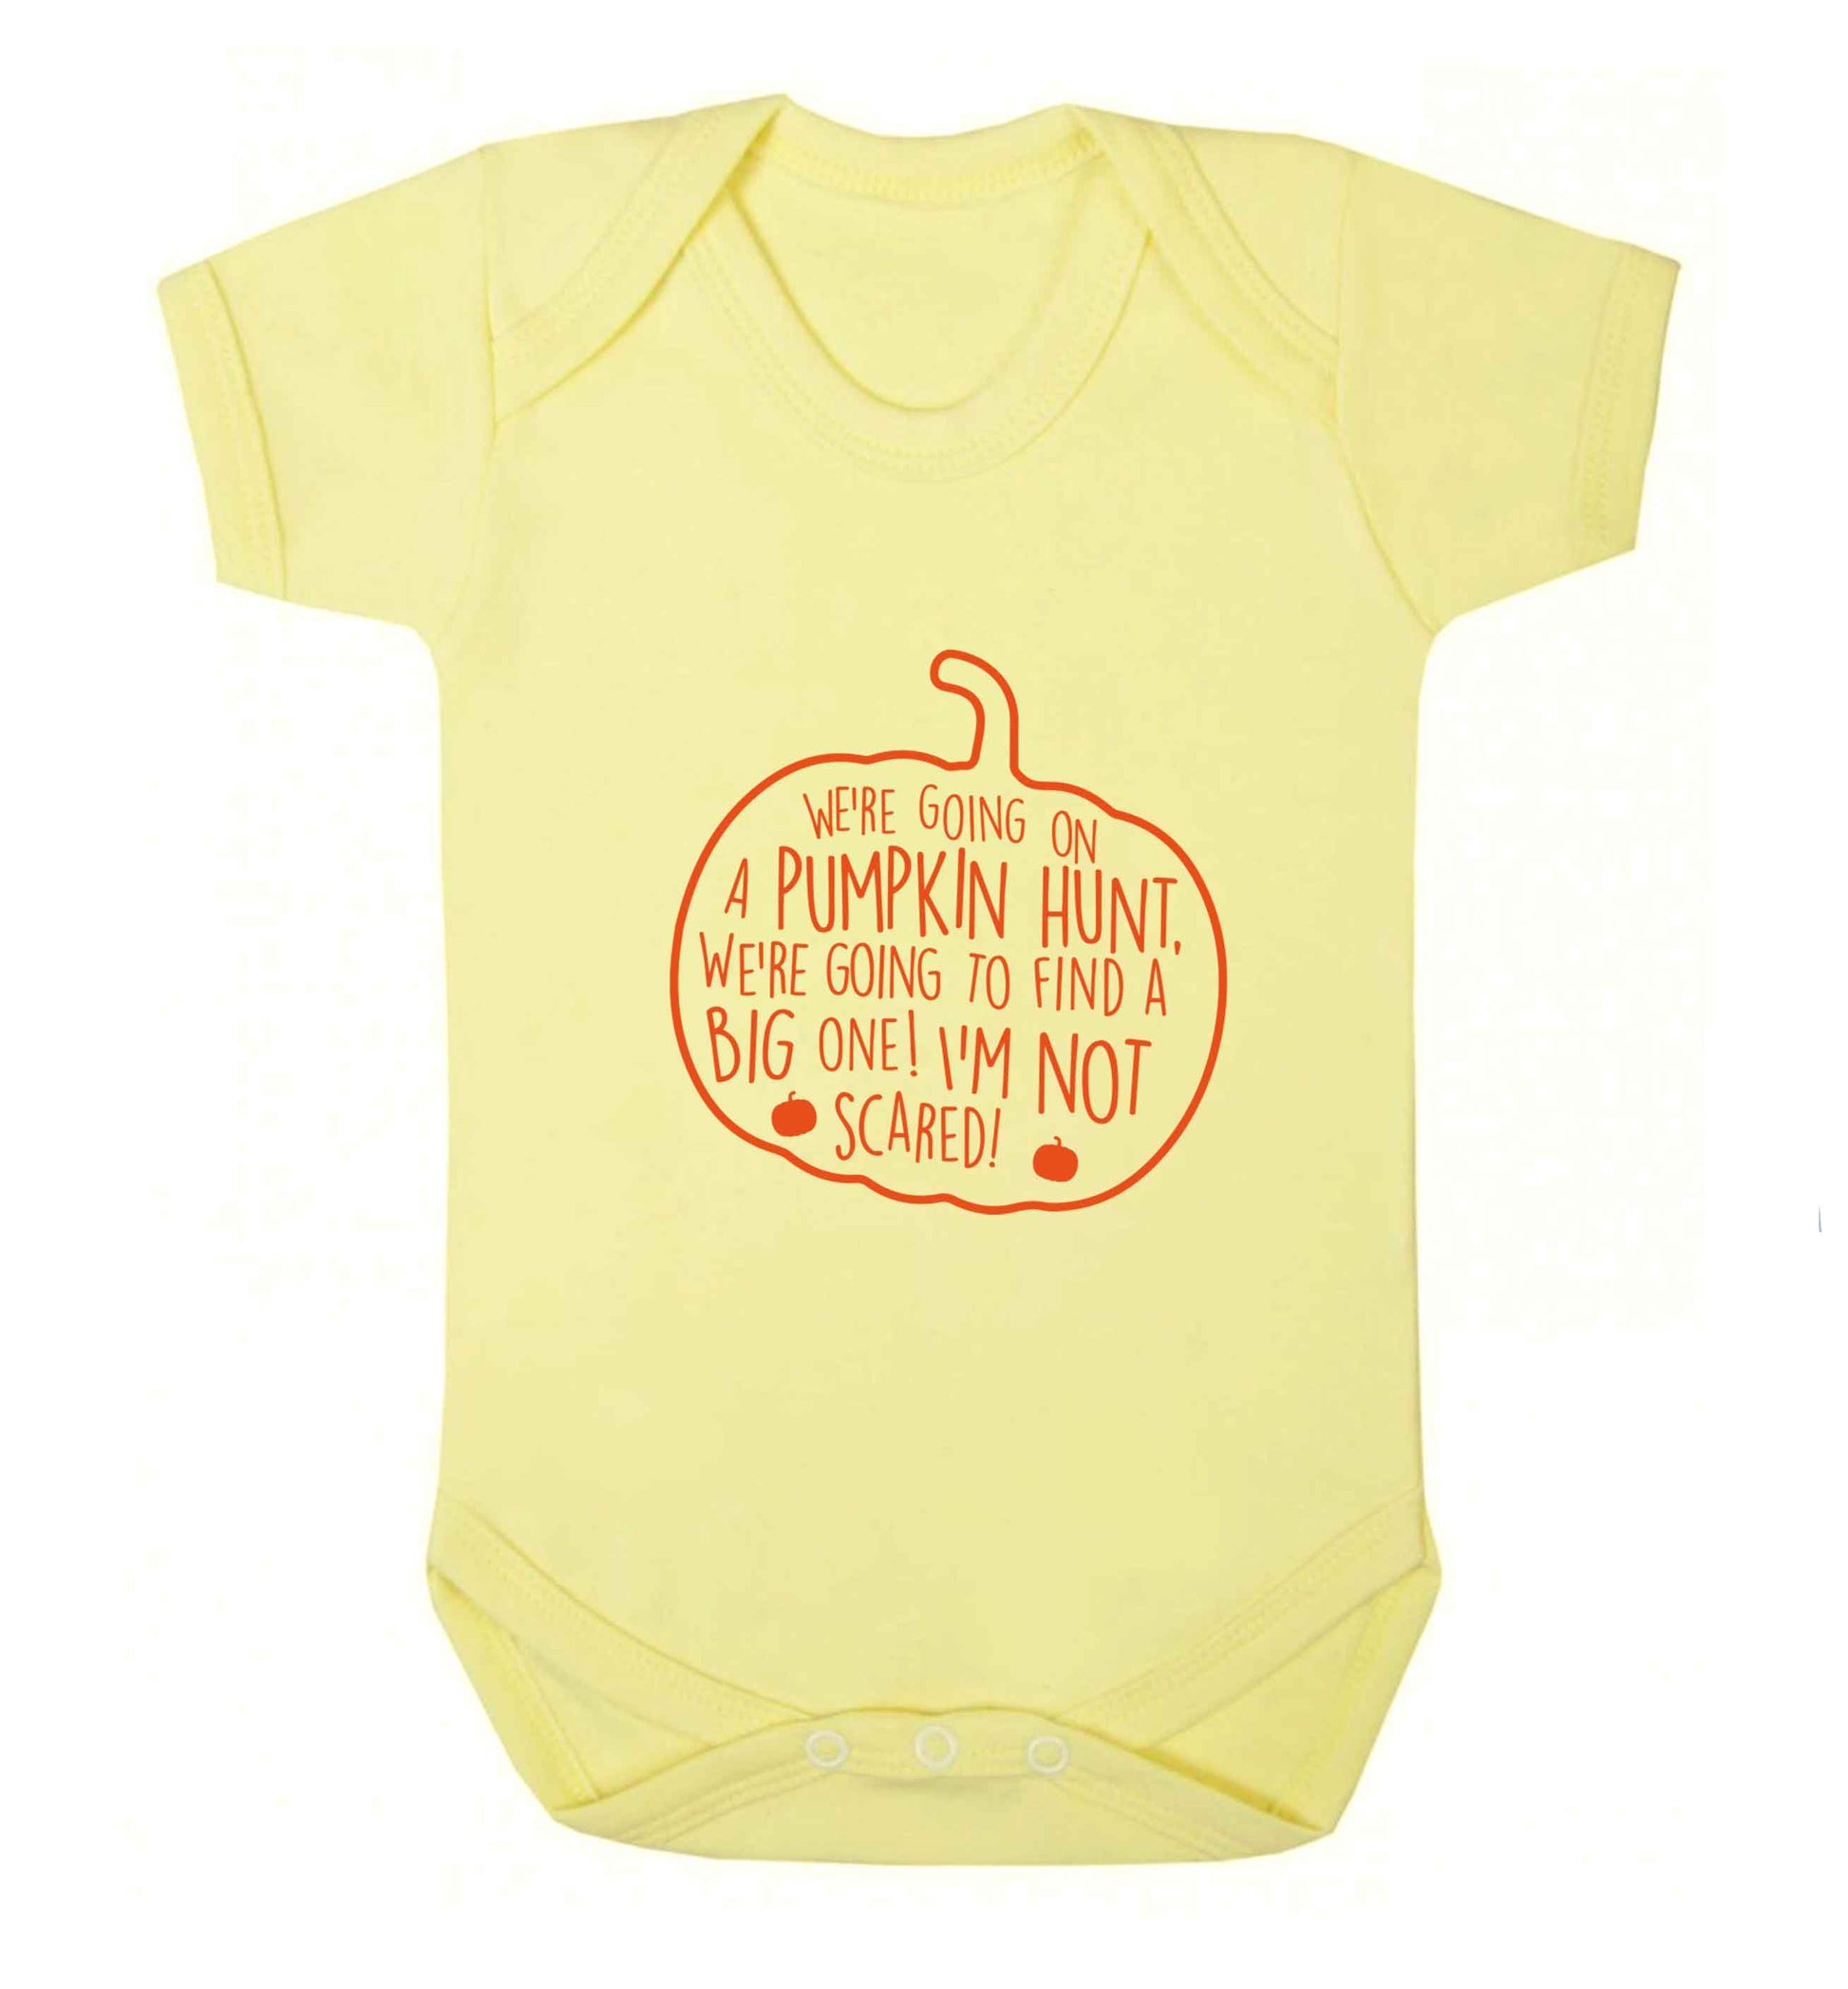 We're going on a pumpkin hunt baby vest pale yellow 18-24 months